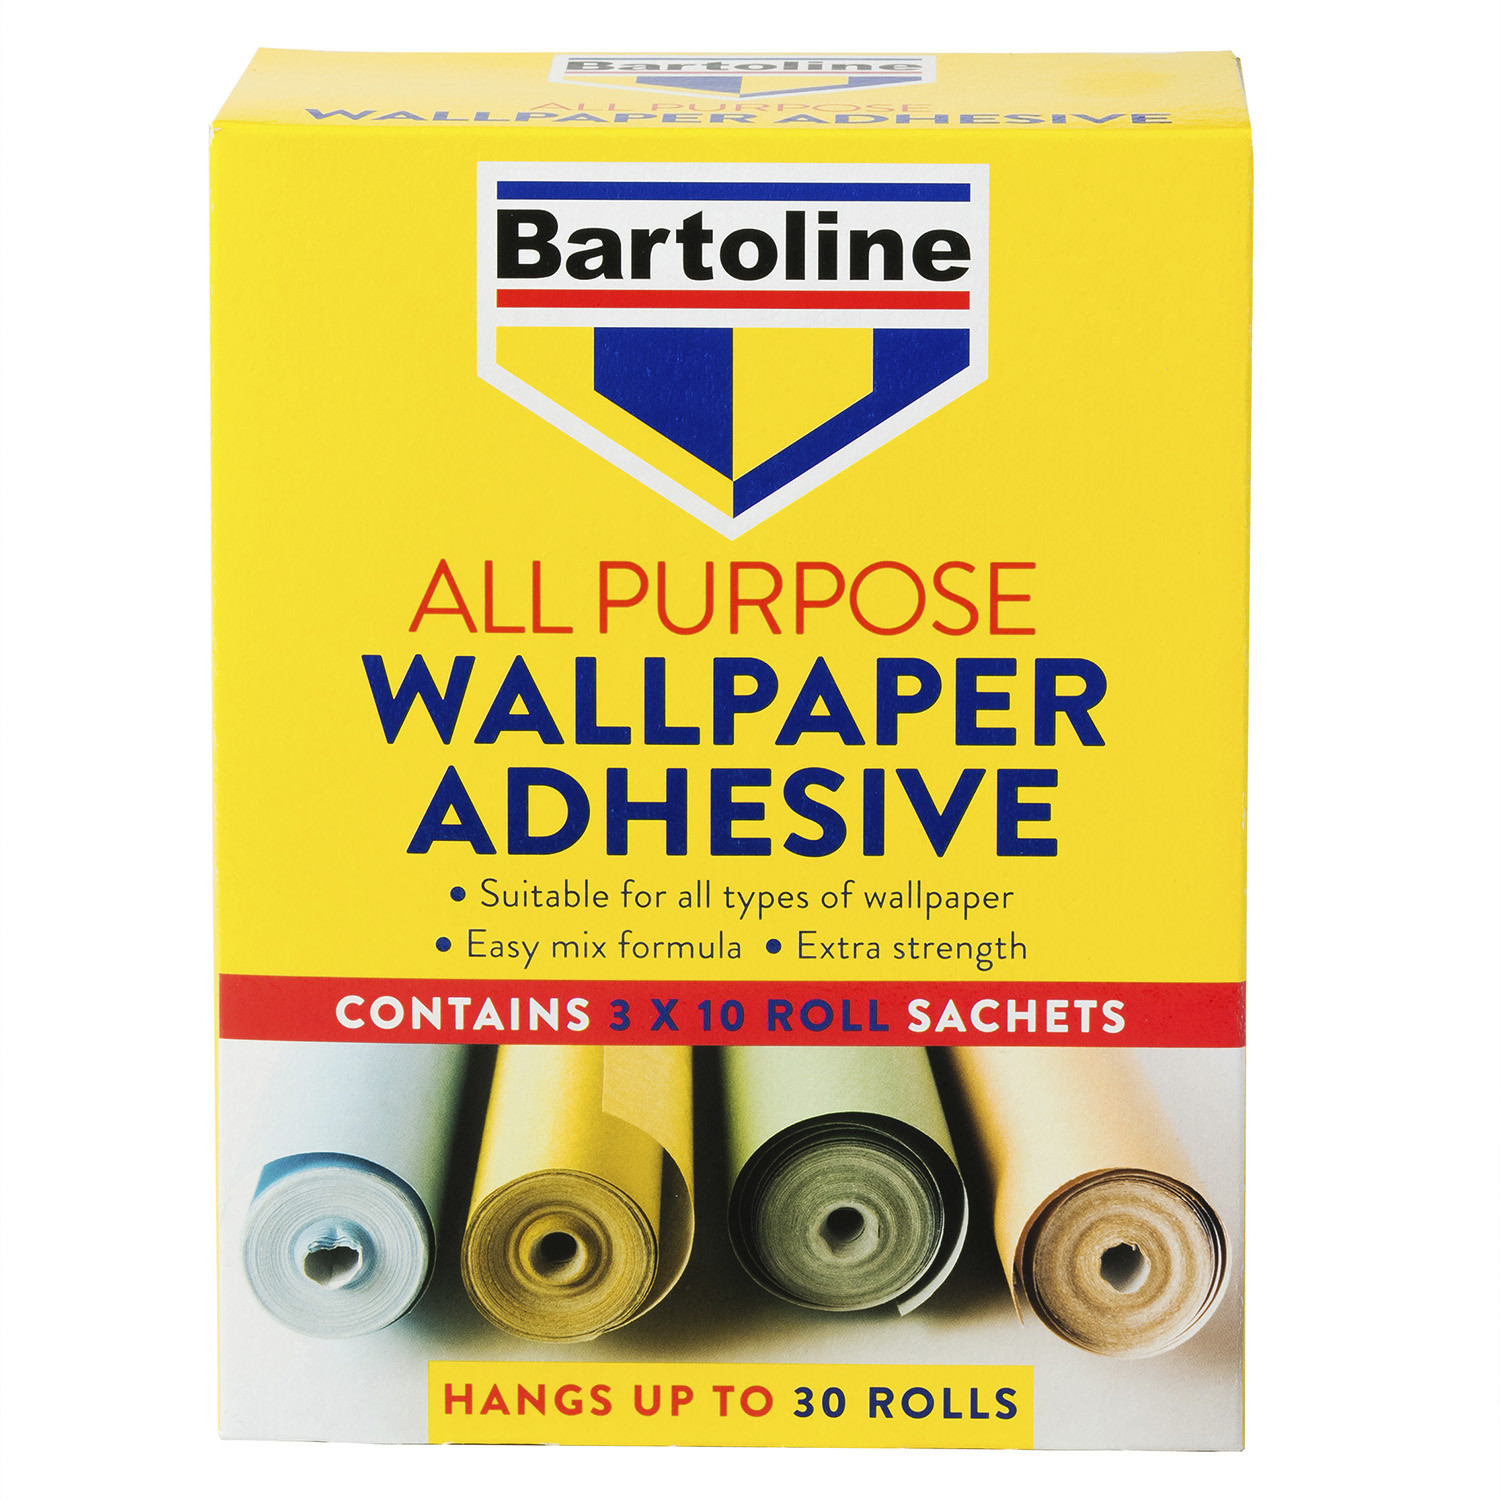 Solvite All Purpose Extra Strong Wallpaper Paste - 30 Roll Box